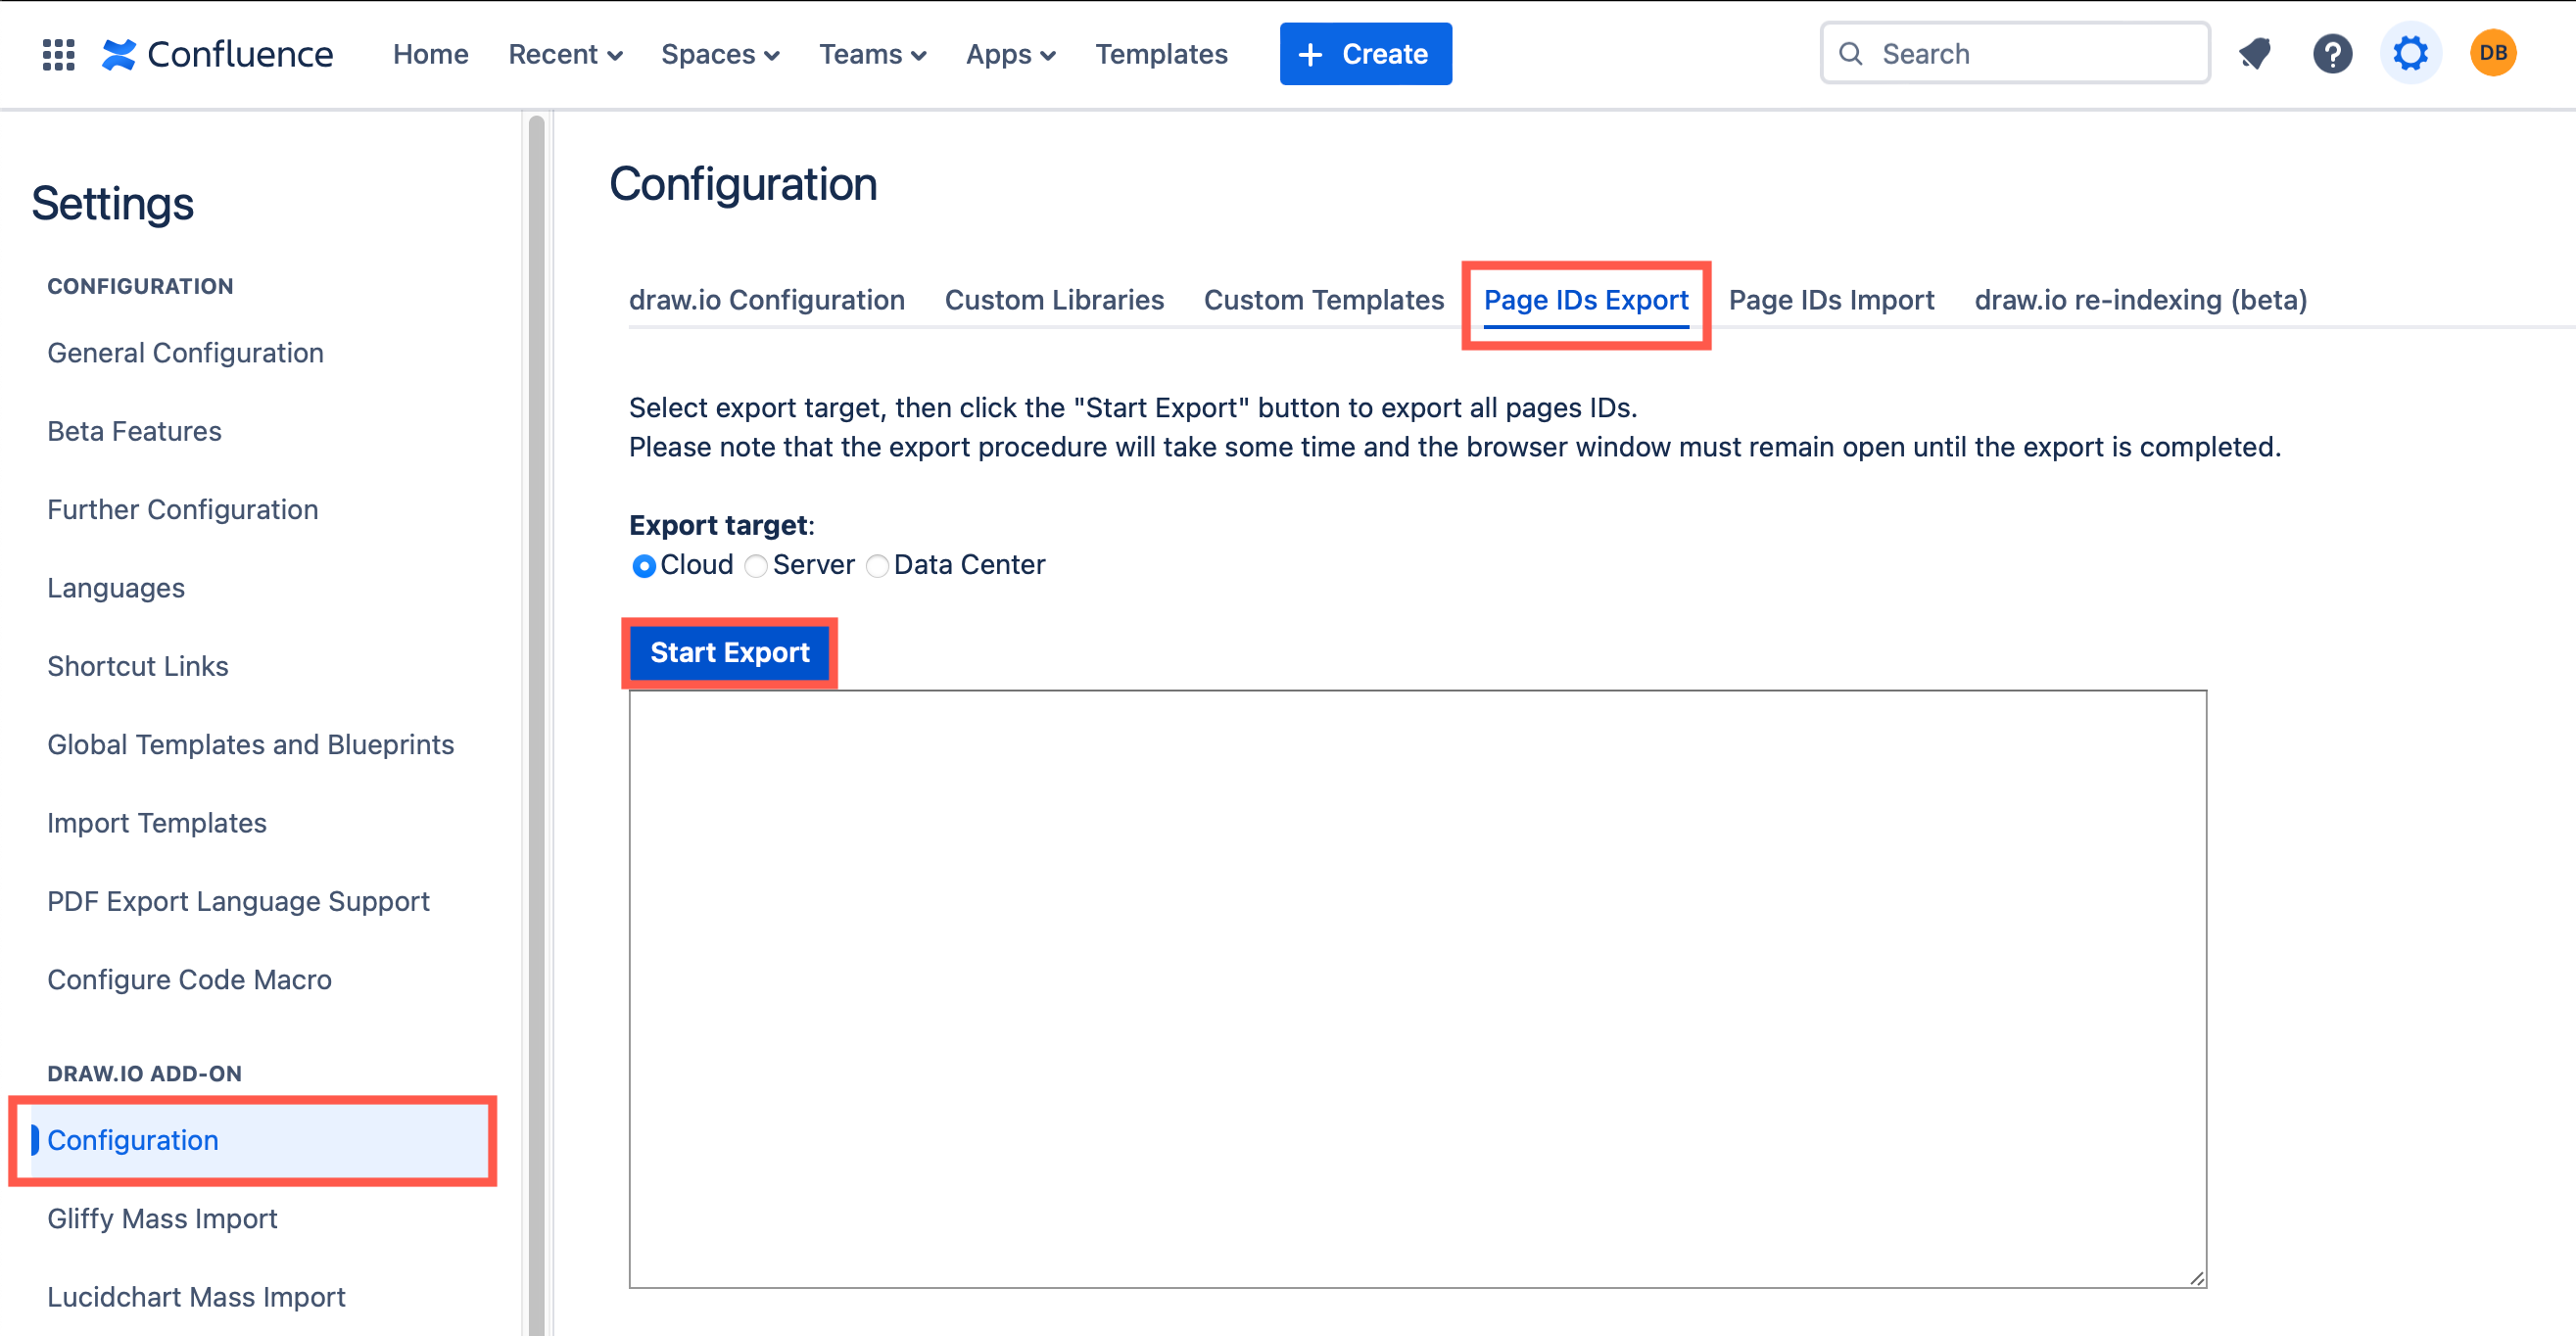 To make sure links in diagrams continue to work, export the page IDs from Confluence to correctly migrate